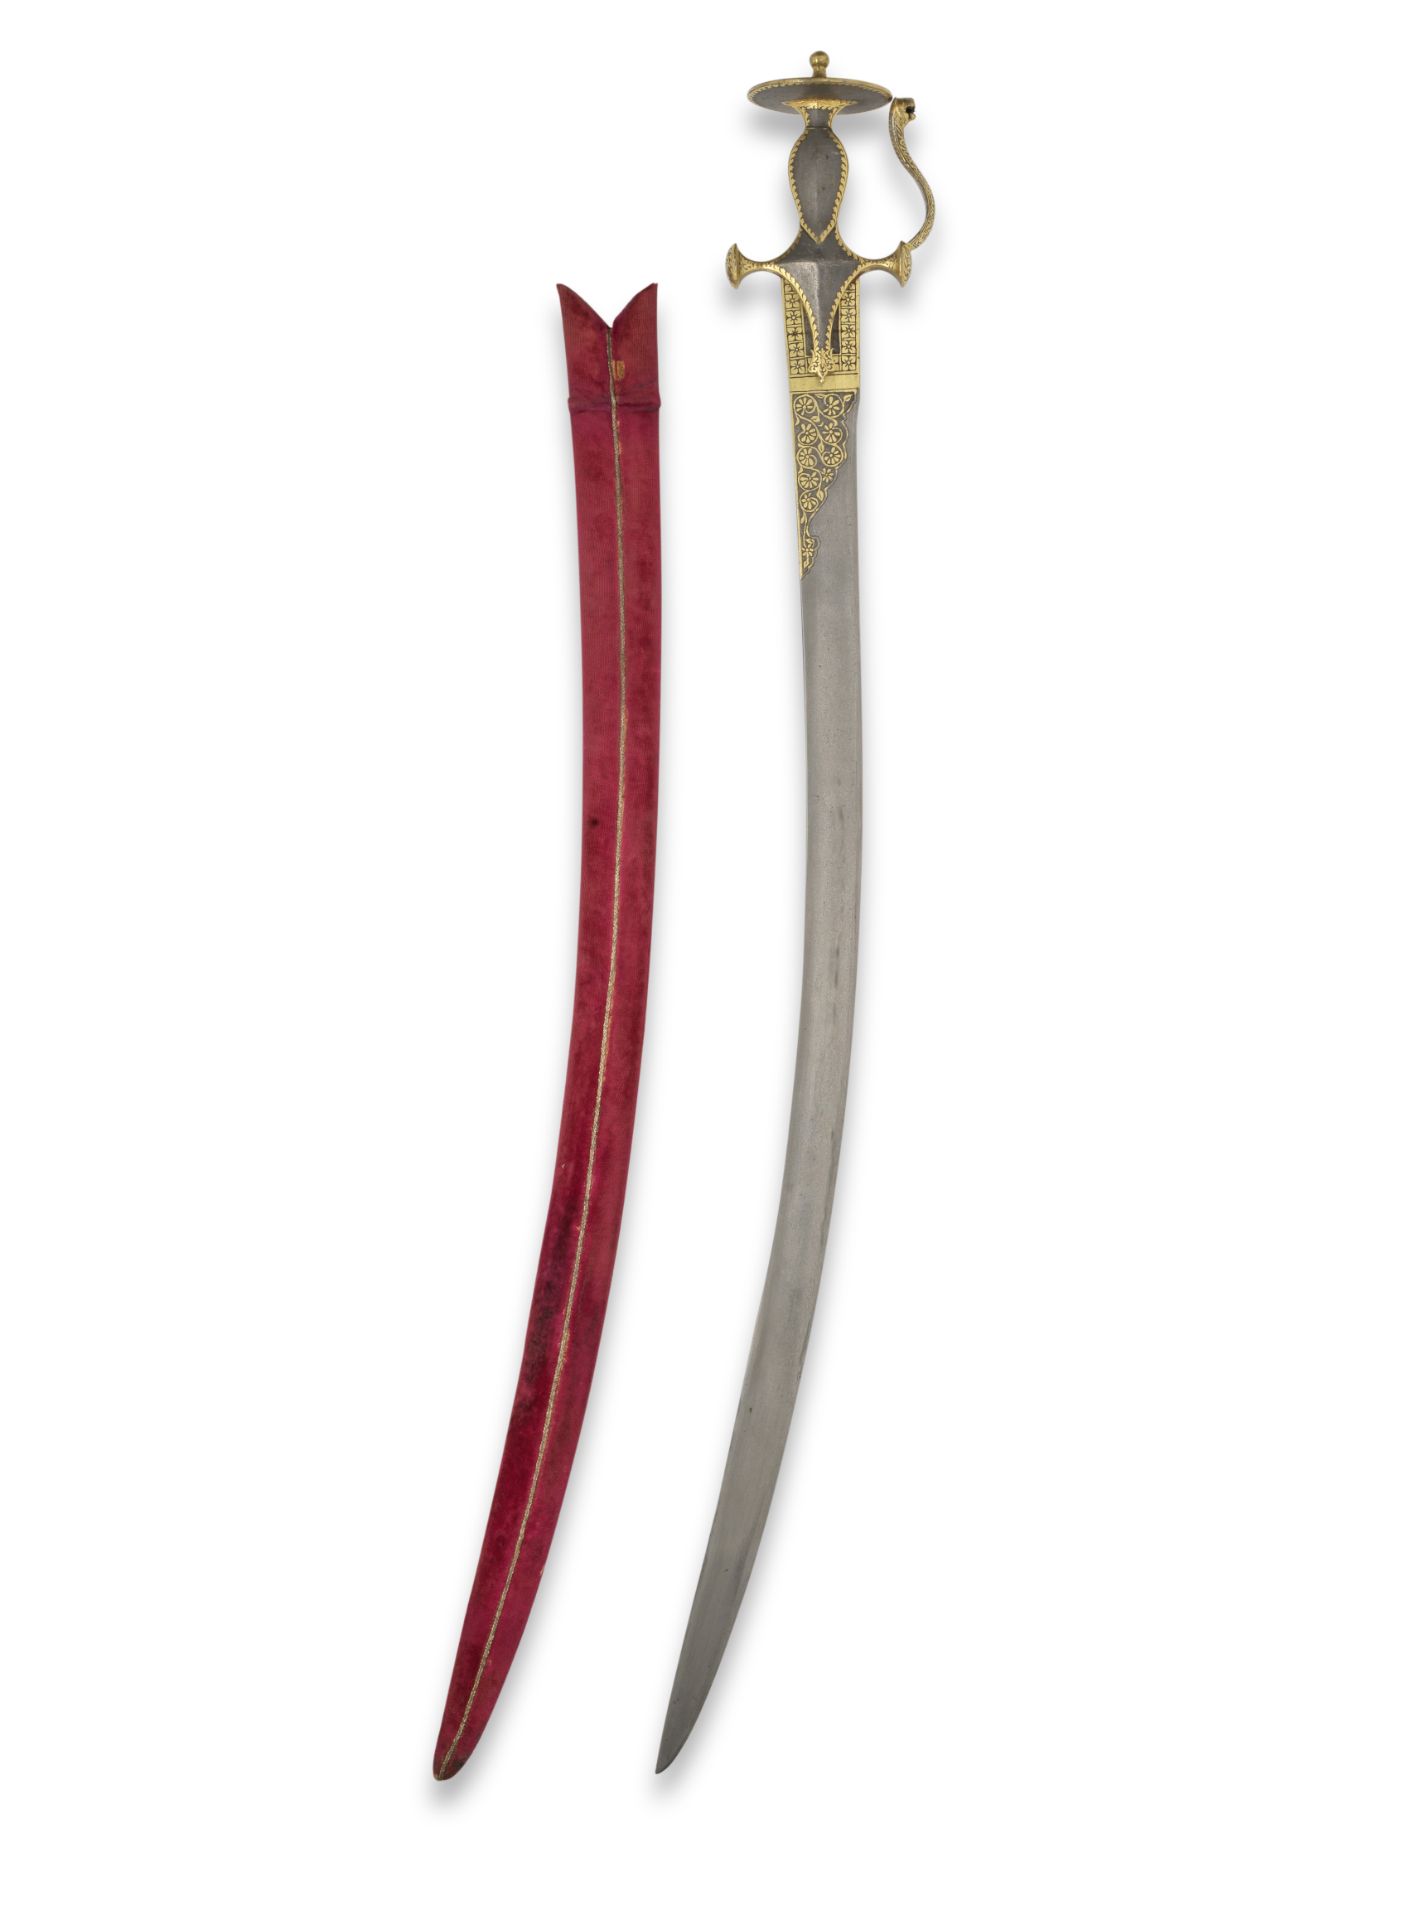 A gold koftgari steel sword (tulwar) with watered-steel hilt India, 19th Century